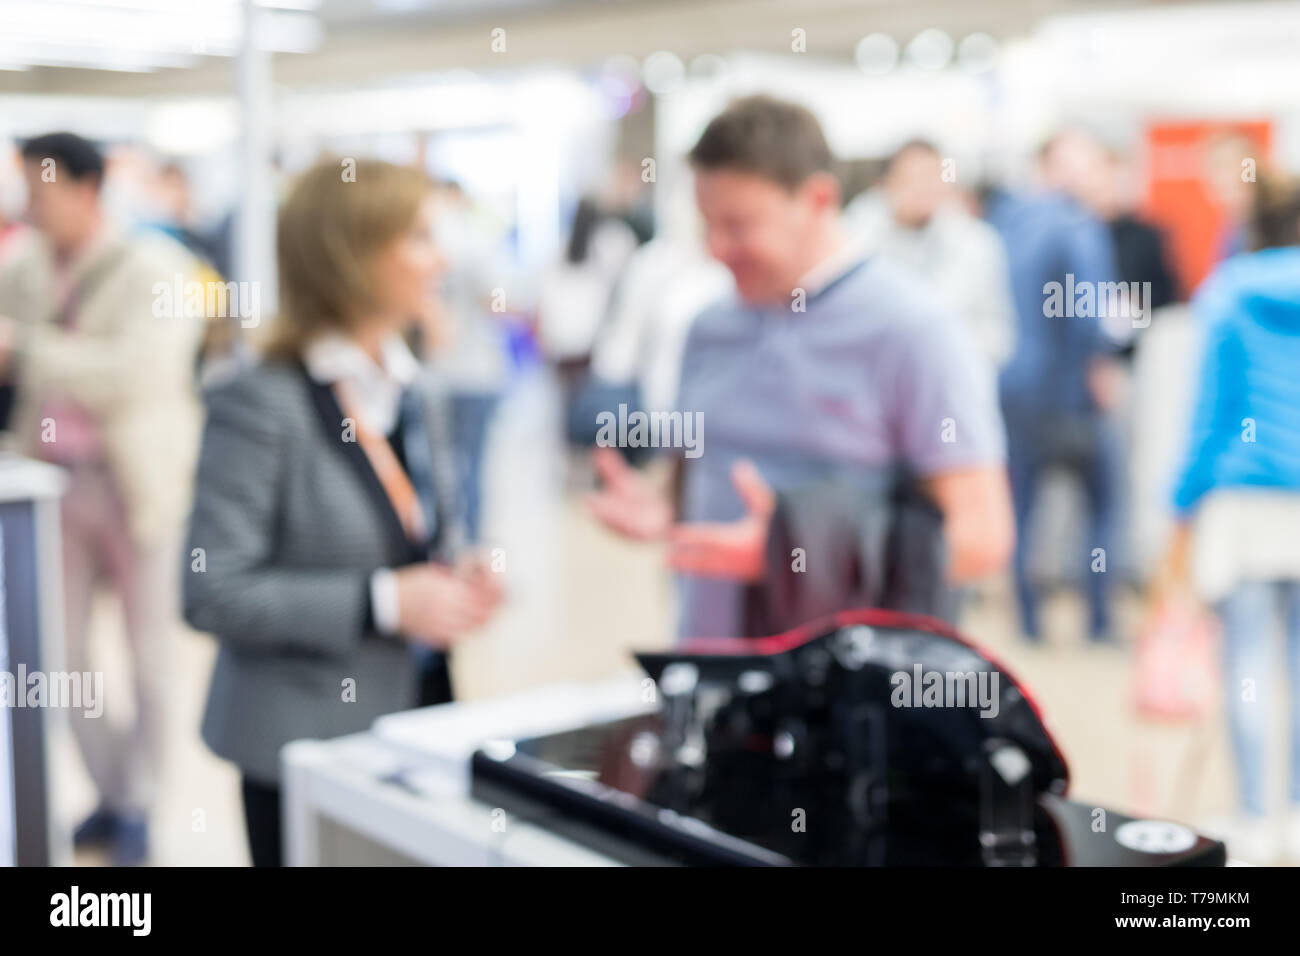 Blured image of businesspeople socializing and networking at business and entrepreneurship meeting. Stock Photo